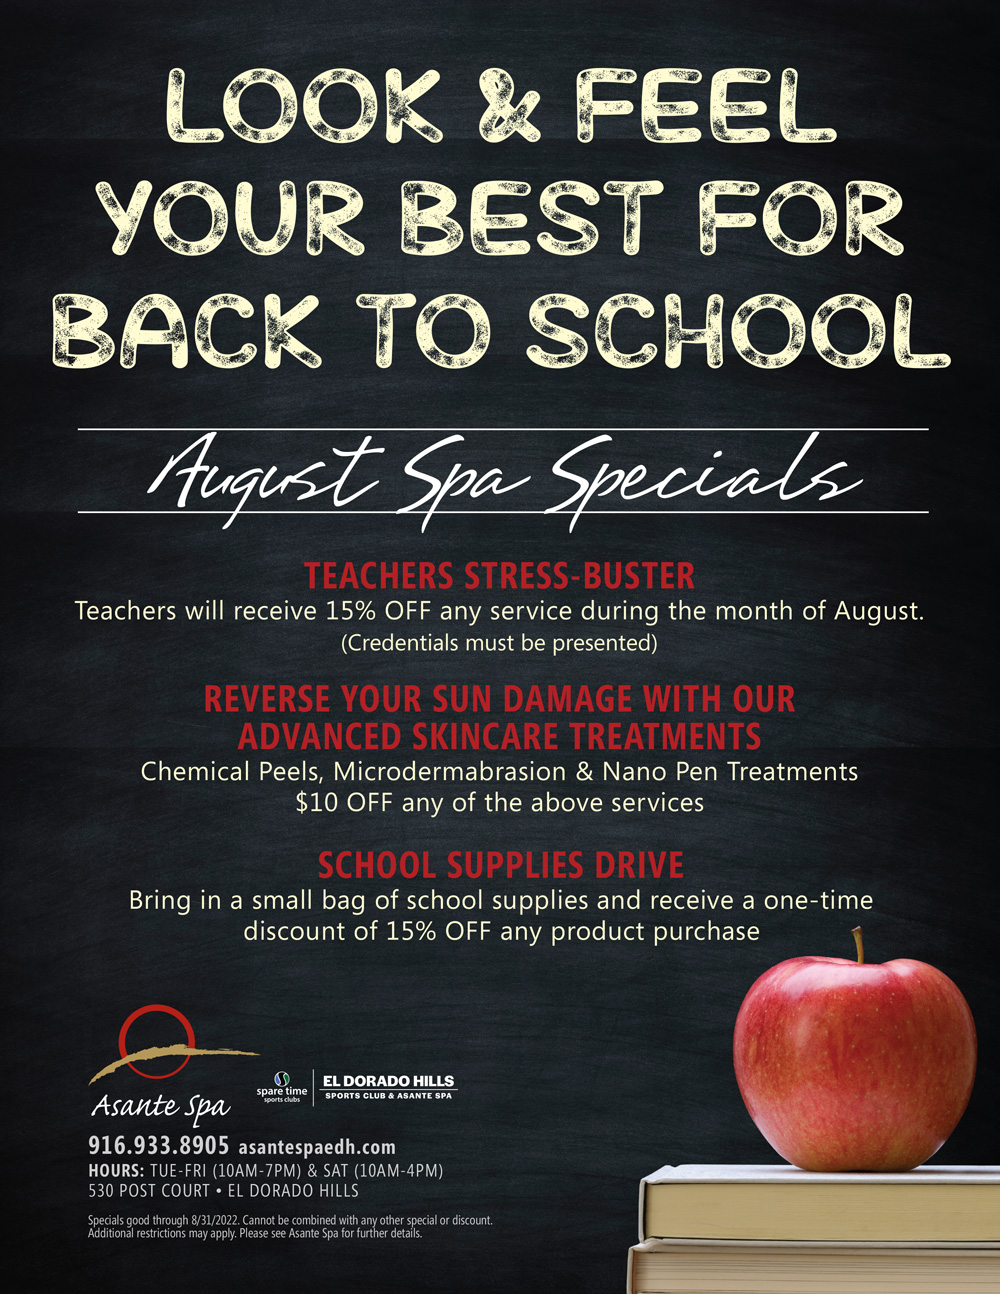 Look and feel your best for back to school august spa specials